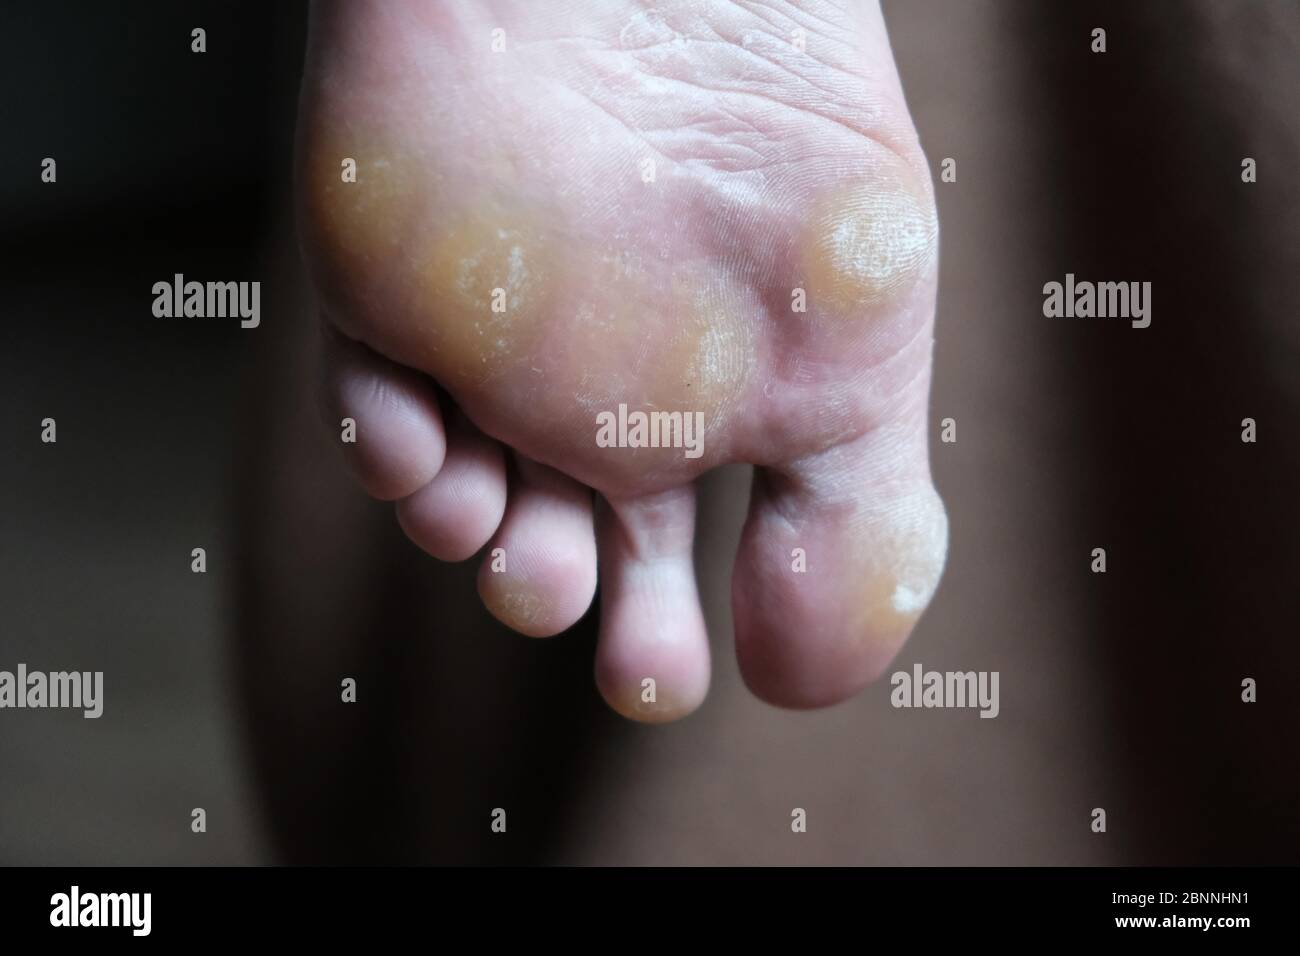 Foot fungus, tinea pedis, fungal infection.dermatology disease. leg fungus  before treatment. Fungal nails unsightly, thickened and crumbly, become pai  Stock Photo - Alamy